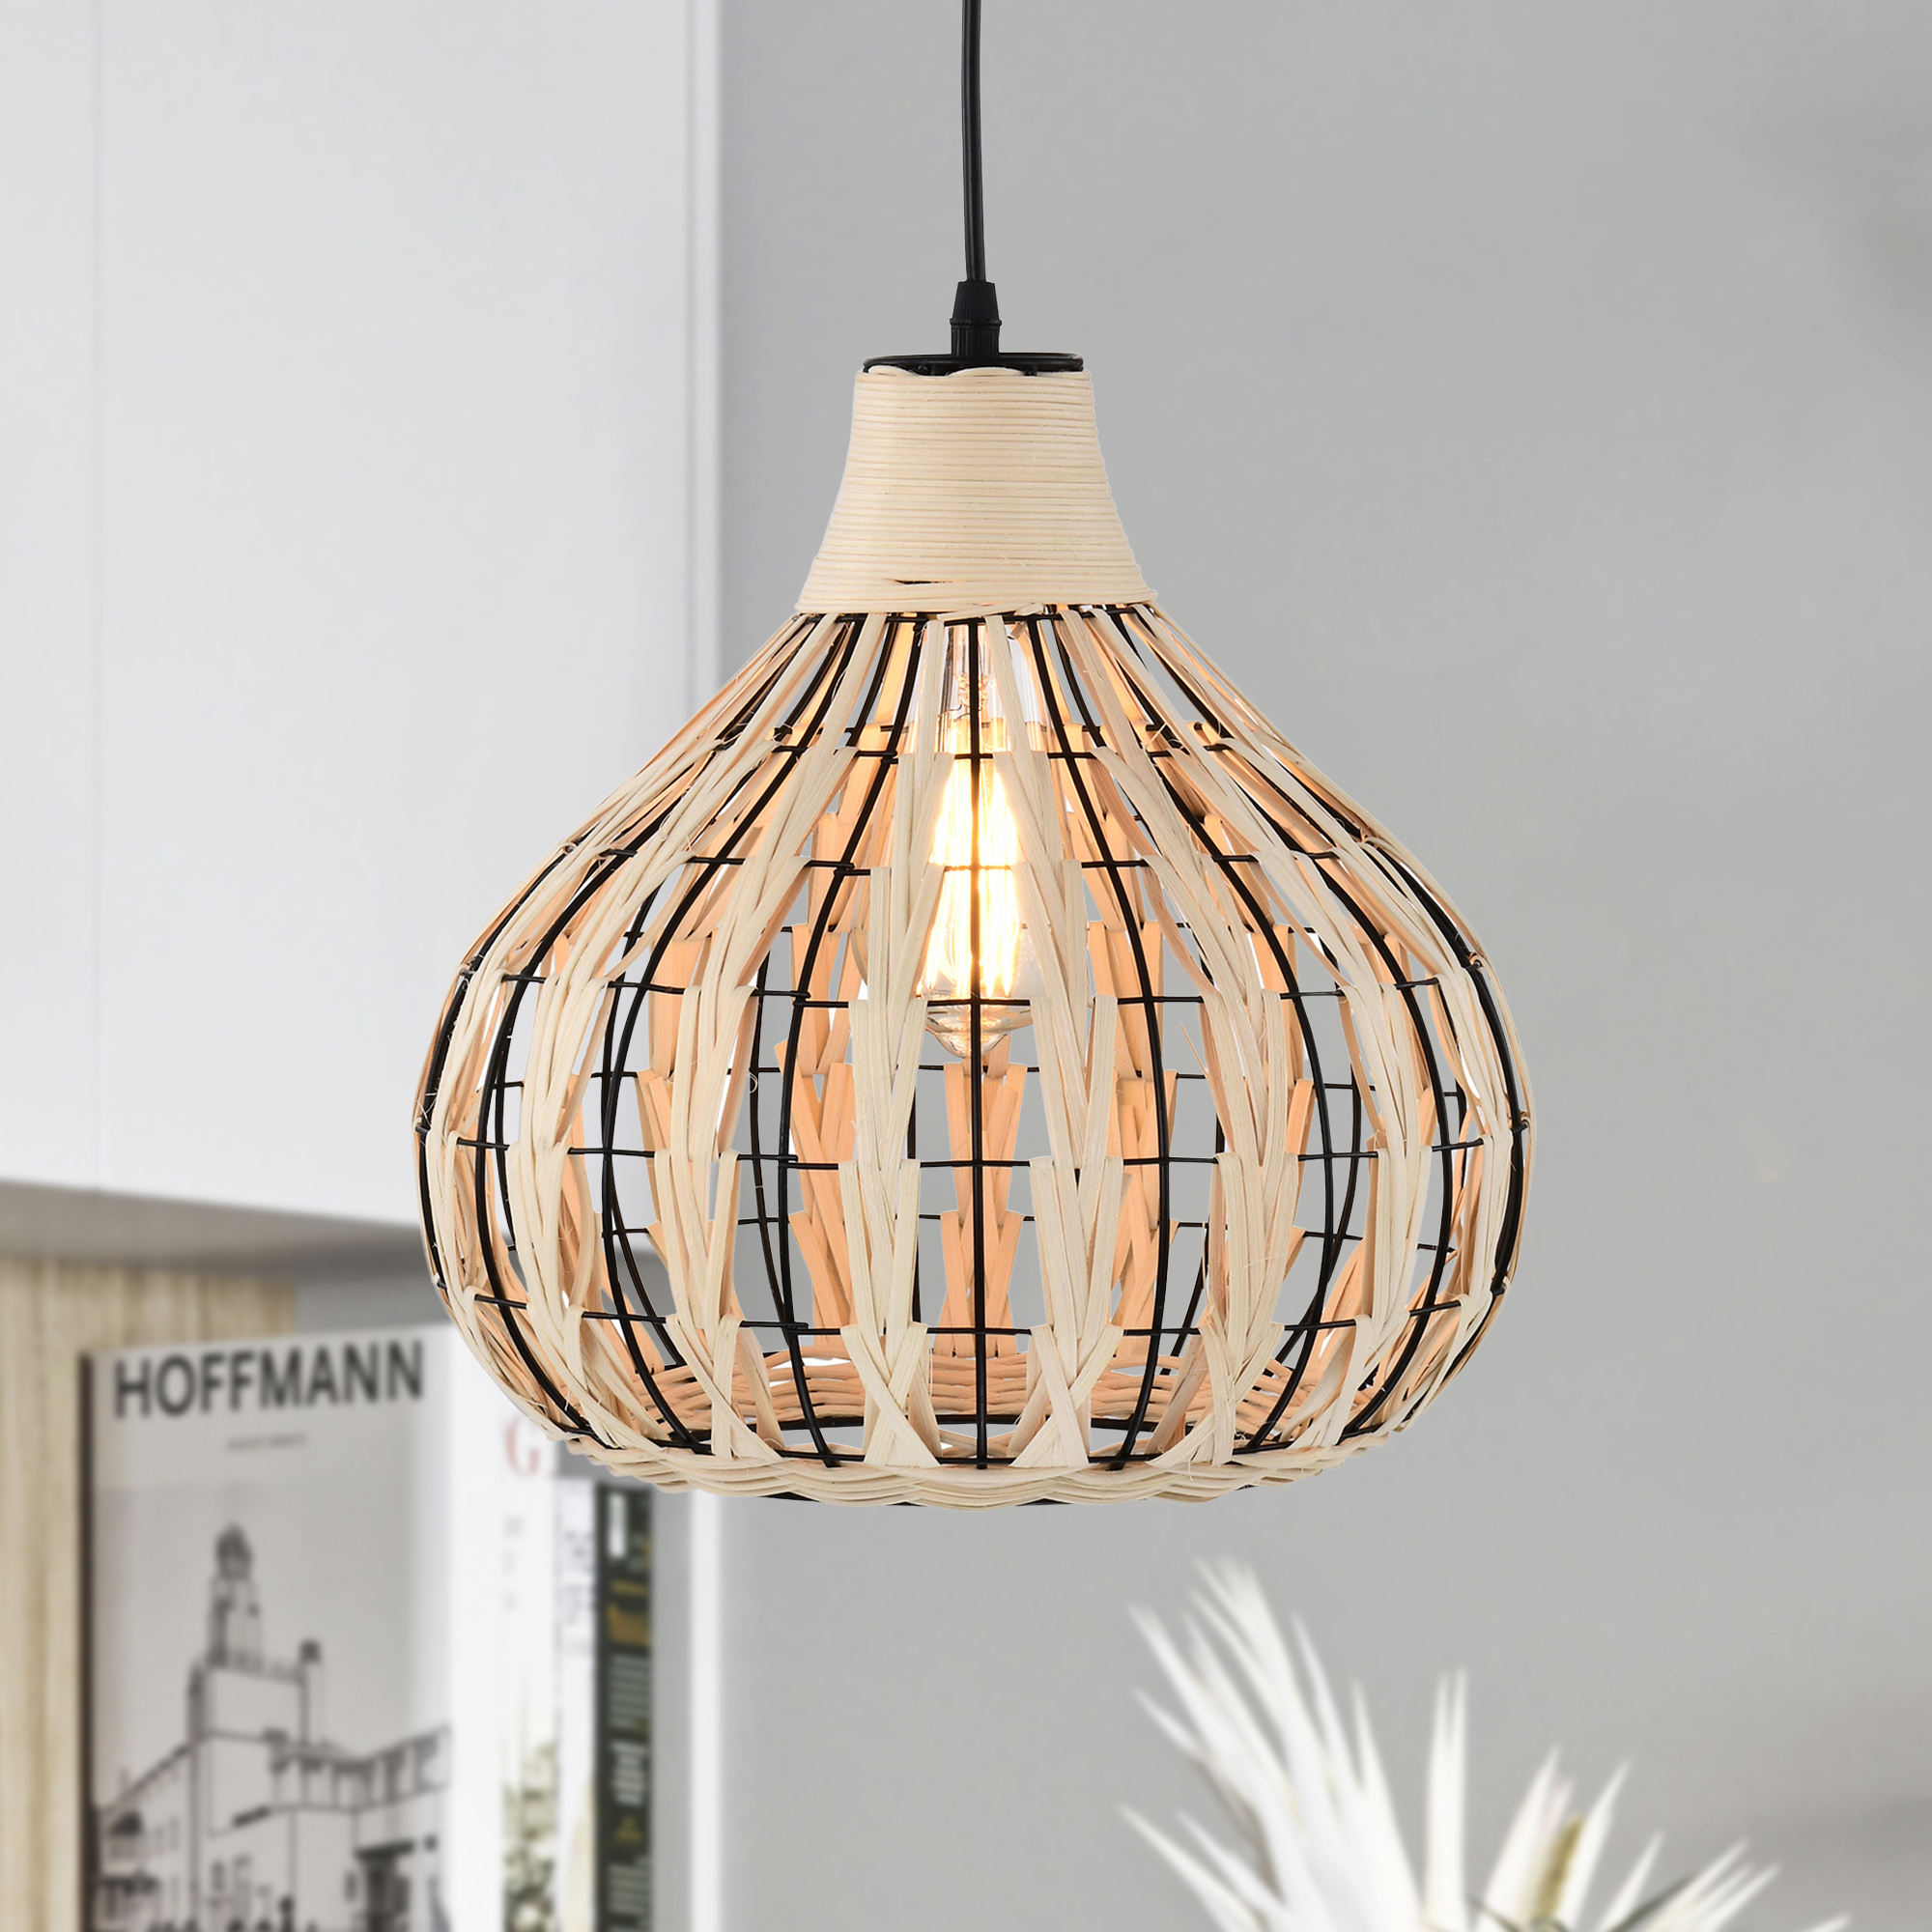 Zilpah 12 in. 1-Light Indoor Matte Black and Woven Rattan Finish Pendant with Light Kit